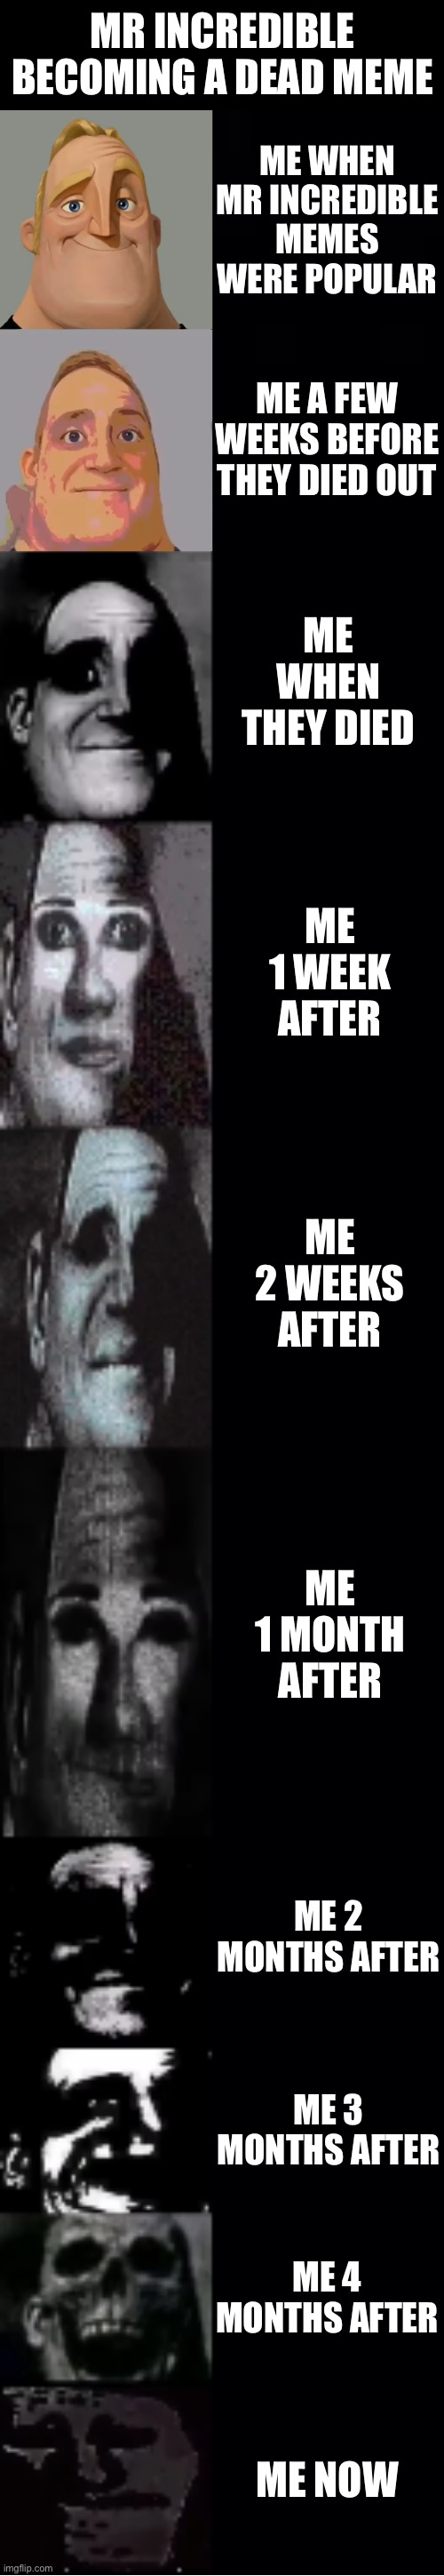 They were going strong but poof, no more! | MR INCREDIBLE BECOMING A DEAD MEME; ME WHEN MR INCREDIBLE MEMES WERE POPULAR; ME A FEW WEEKS BEFORE THEY DIED OUT; ME WHEN THEY DIED; ME 1 WEEK AFTER; ME 2 WEEKS AFTER; ME 1 MONTH AFTER; ME 2 MONTHS AFTER; ME 3 MONTHS AFTER; ME 4 MONTHS AFTER; ME NOW | image tagged in mr incredible becoming uncanny | made w/ Imgflip meme maker